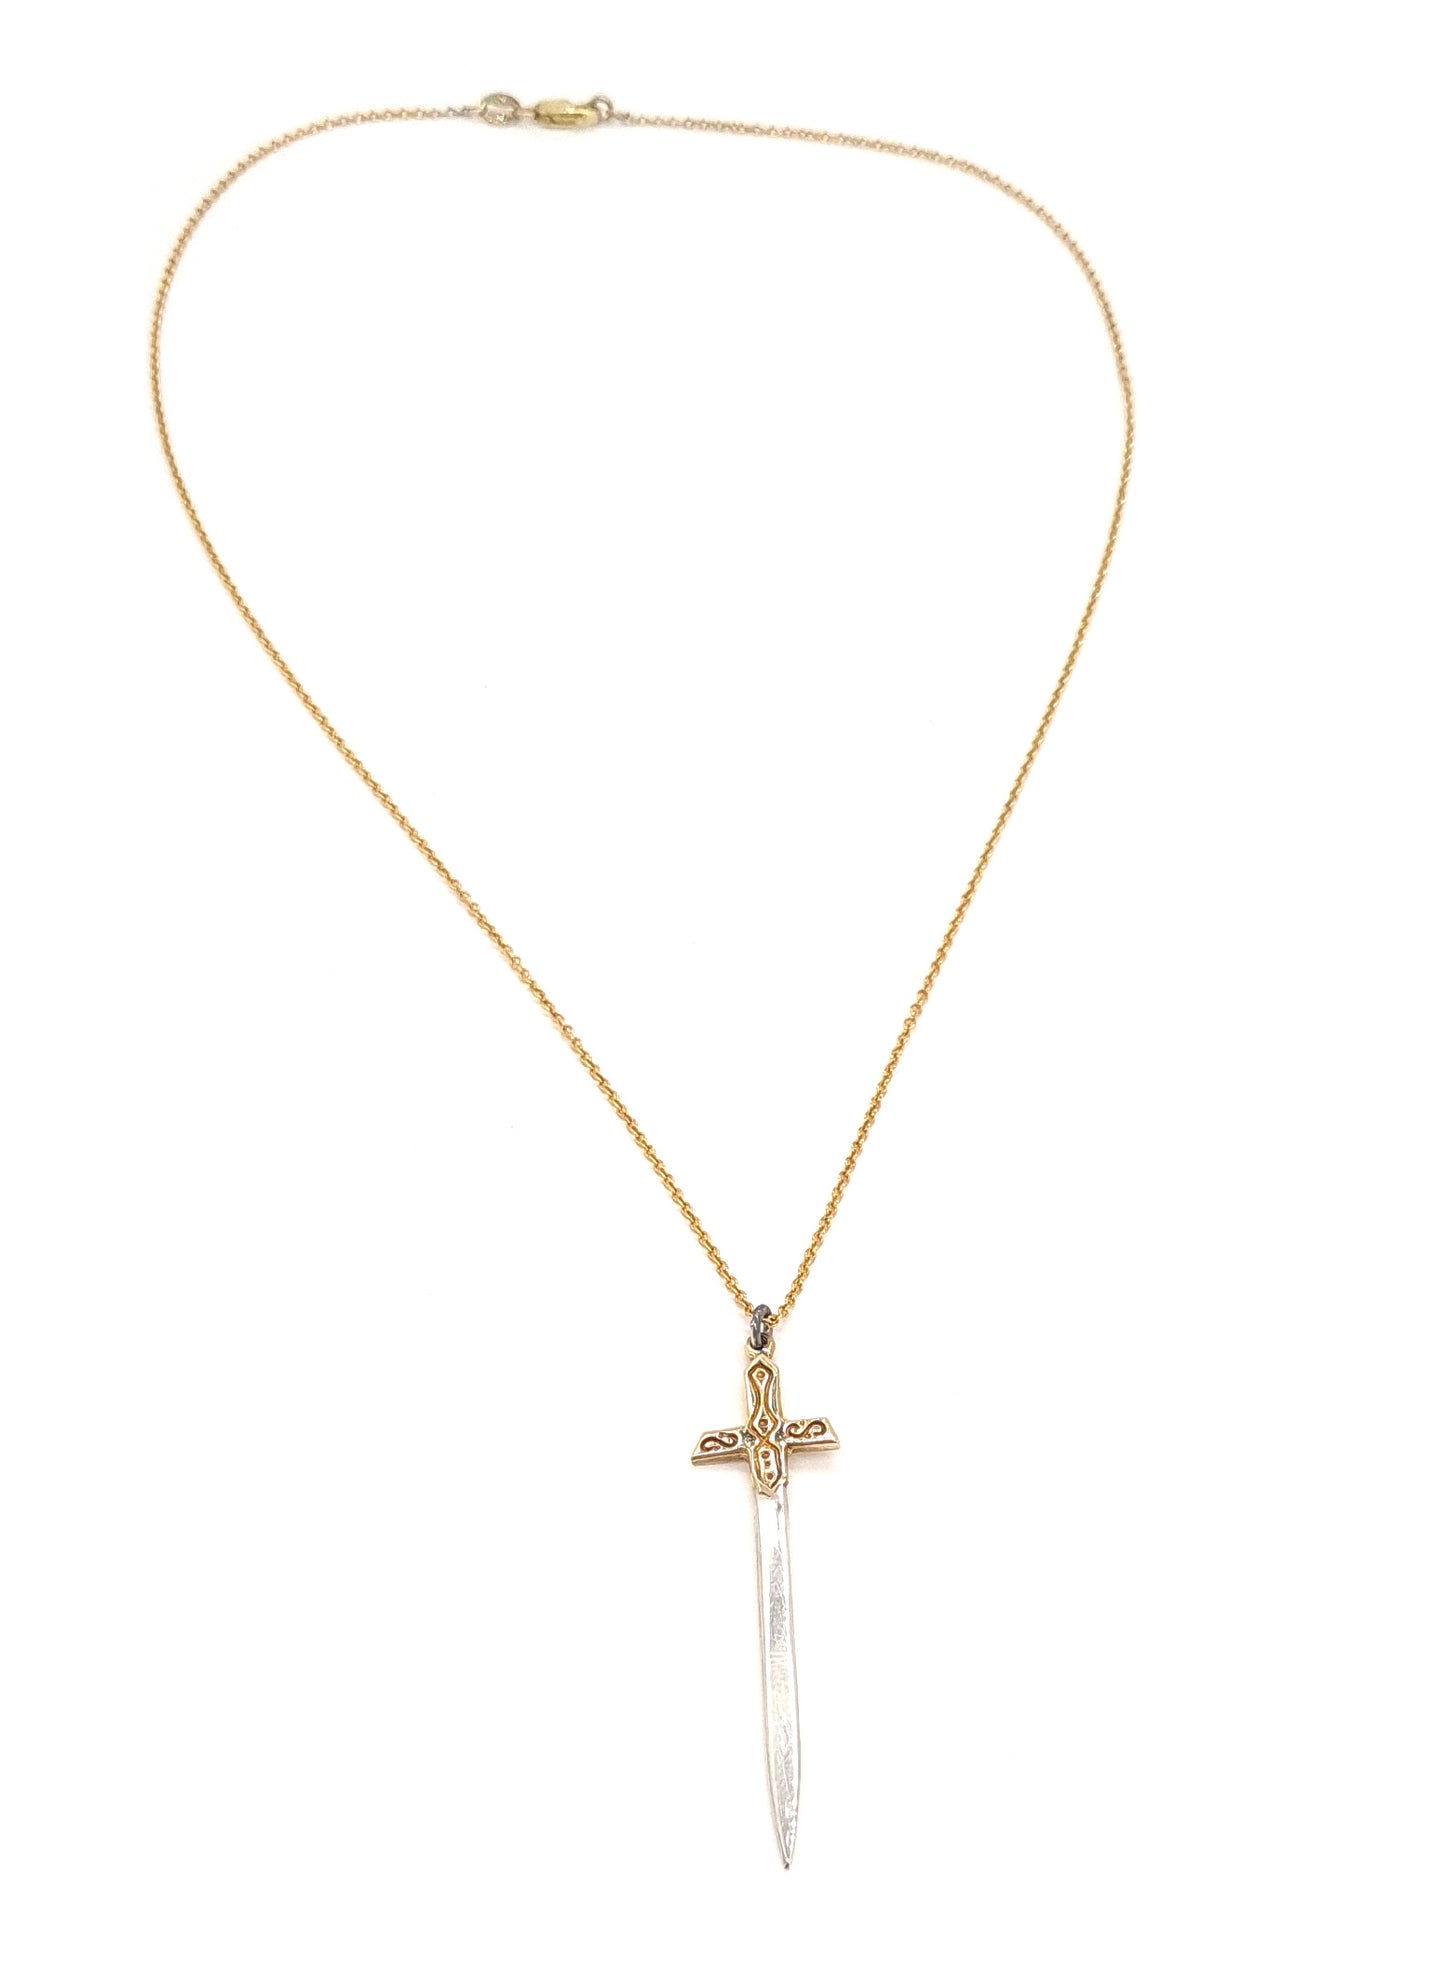 9ct Yellow Gold Excalibur Necklace